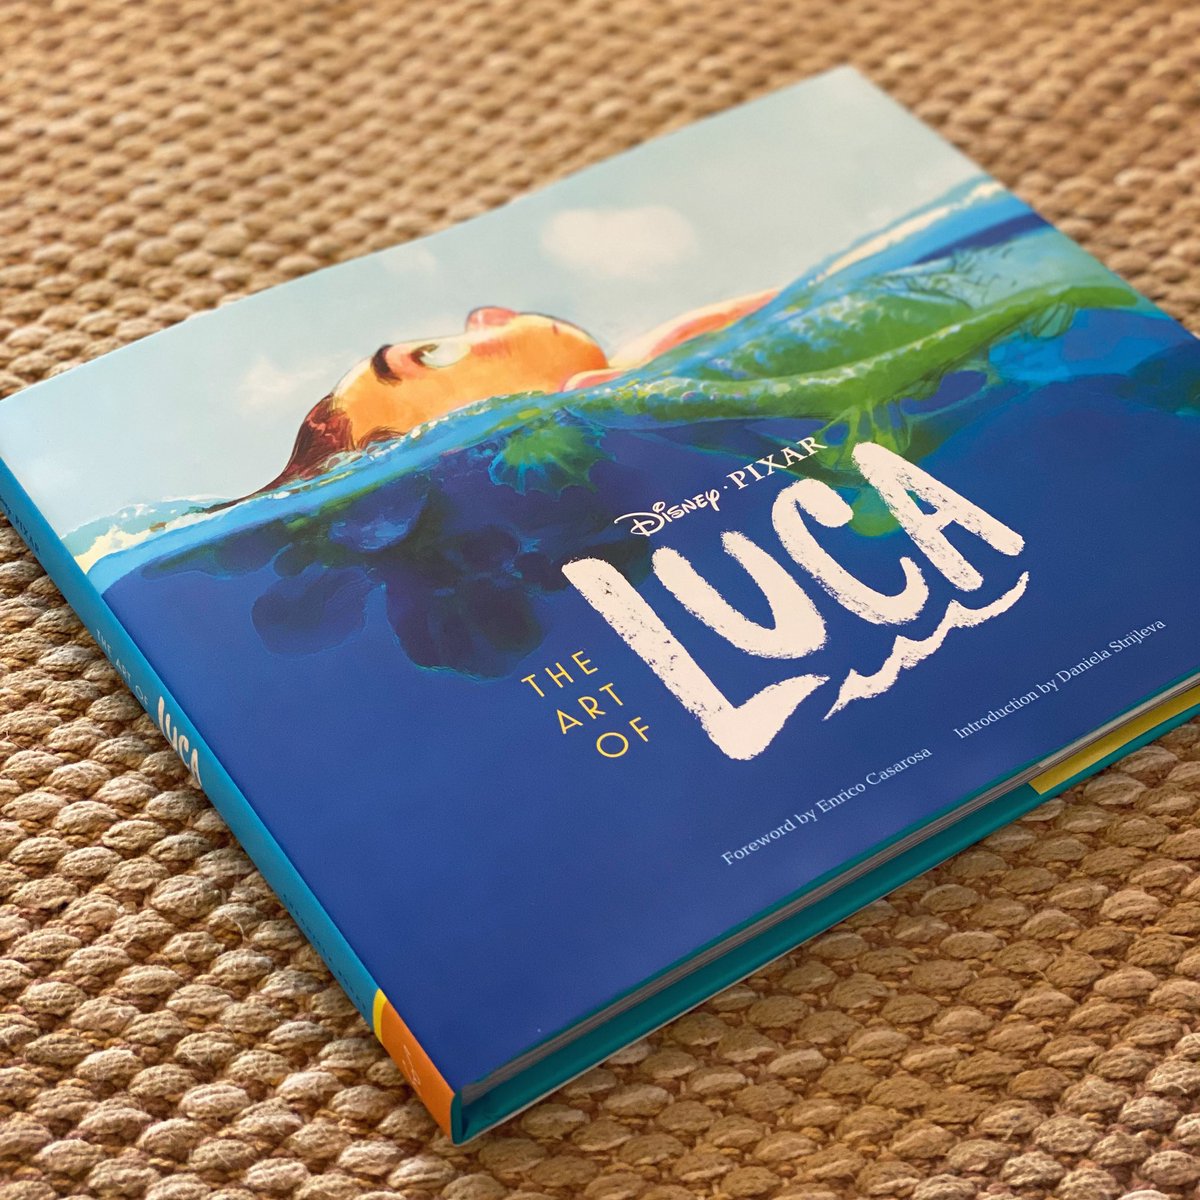 This book is SO beautiful! Congrats @FirstNameDani @joshholtsclaw @donshank @paulabadillaart Deanna Marsigliese, Jennifer Chang & the whole art team! I can stop paging through this & want everything on my walls! 💙 #pixarluca